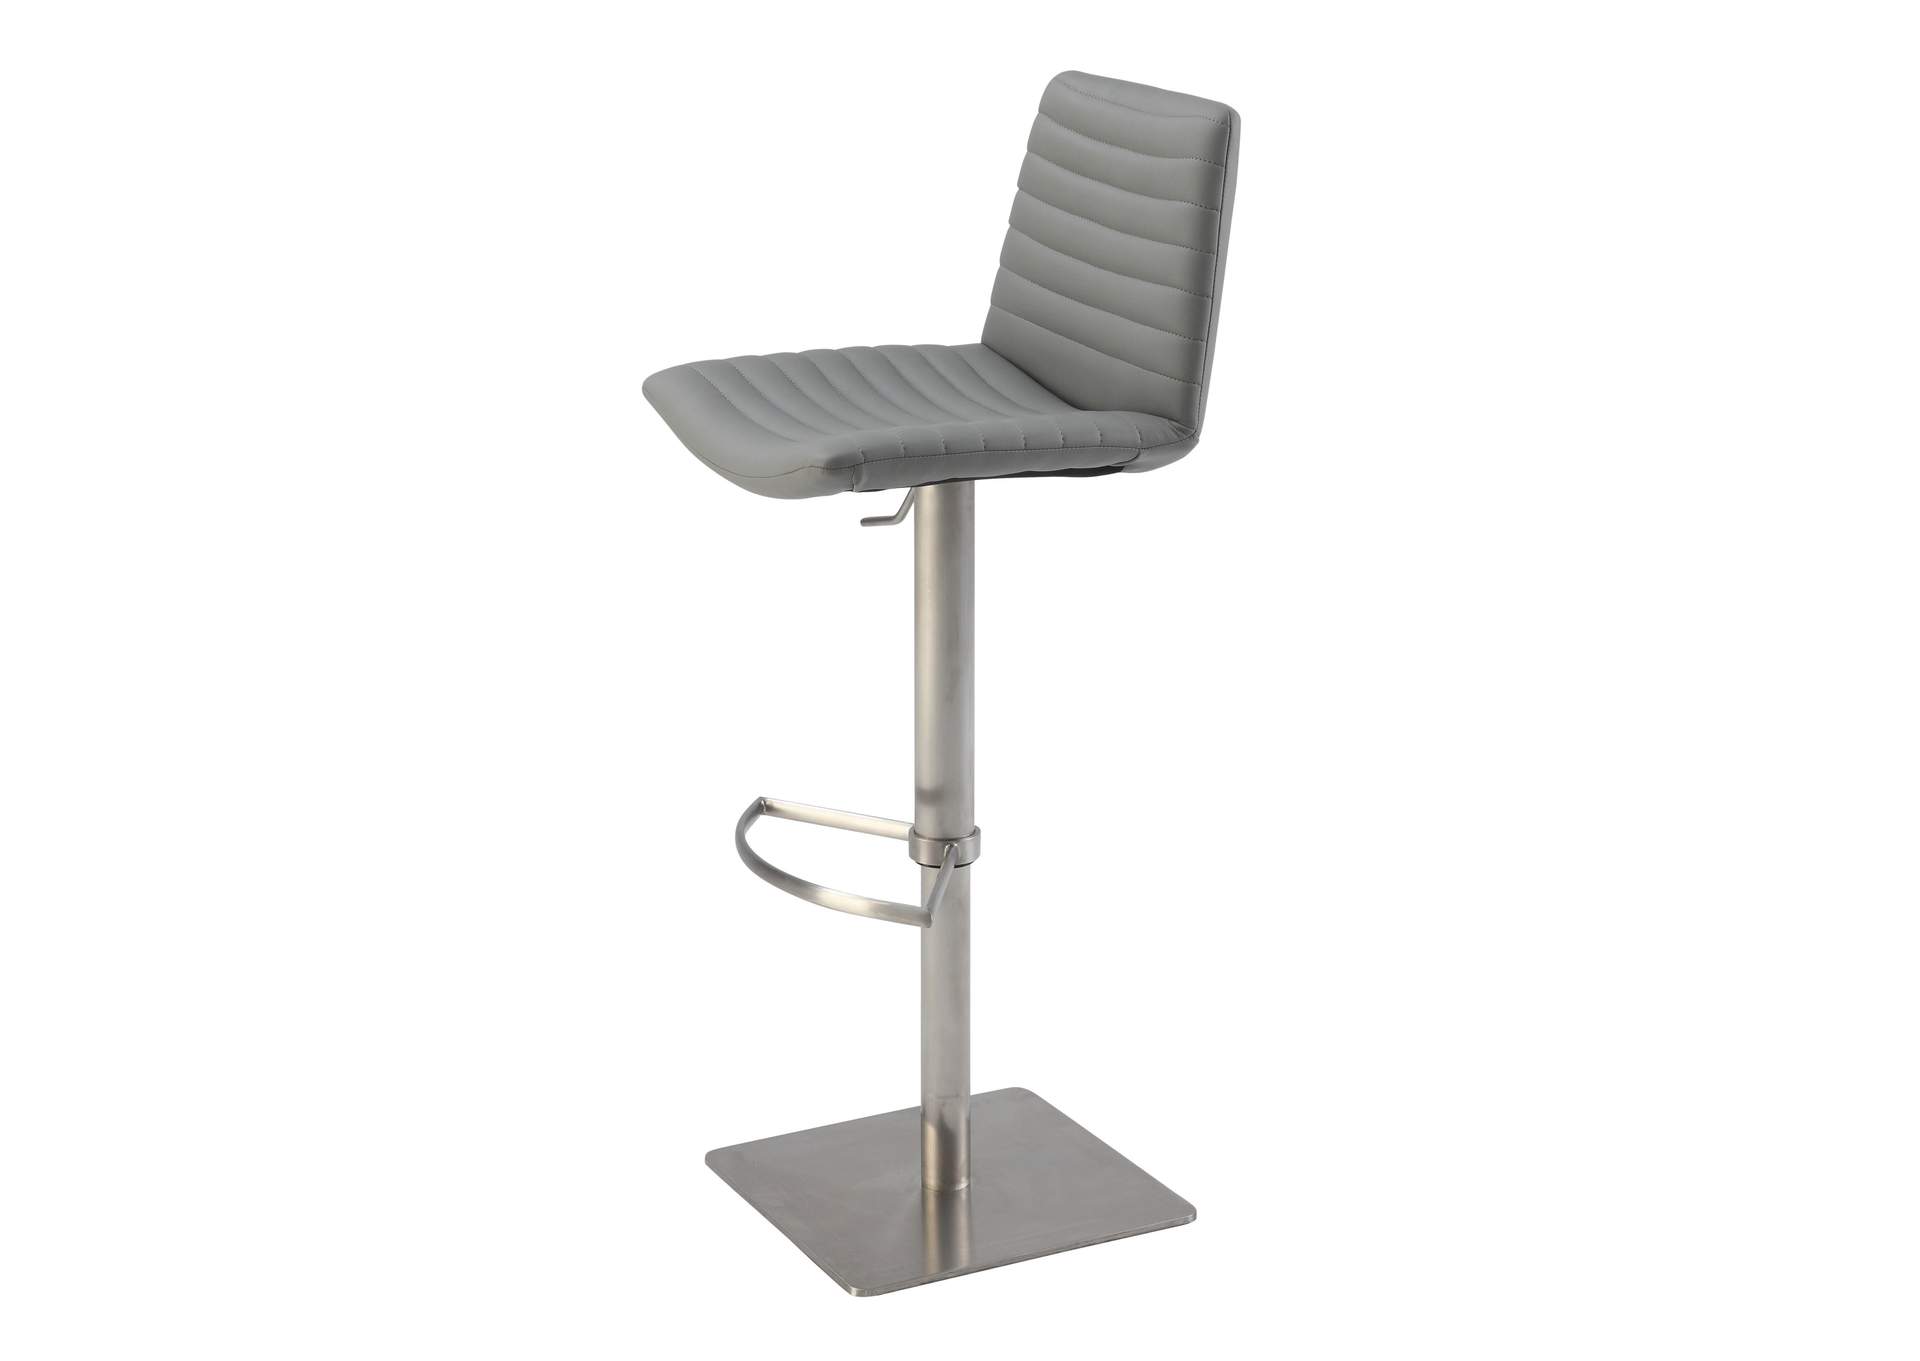 Ribbed Back And Seat Pneumatic-Adjustable Stool,Chintaly Imports